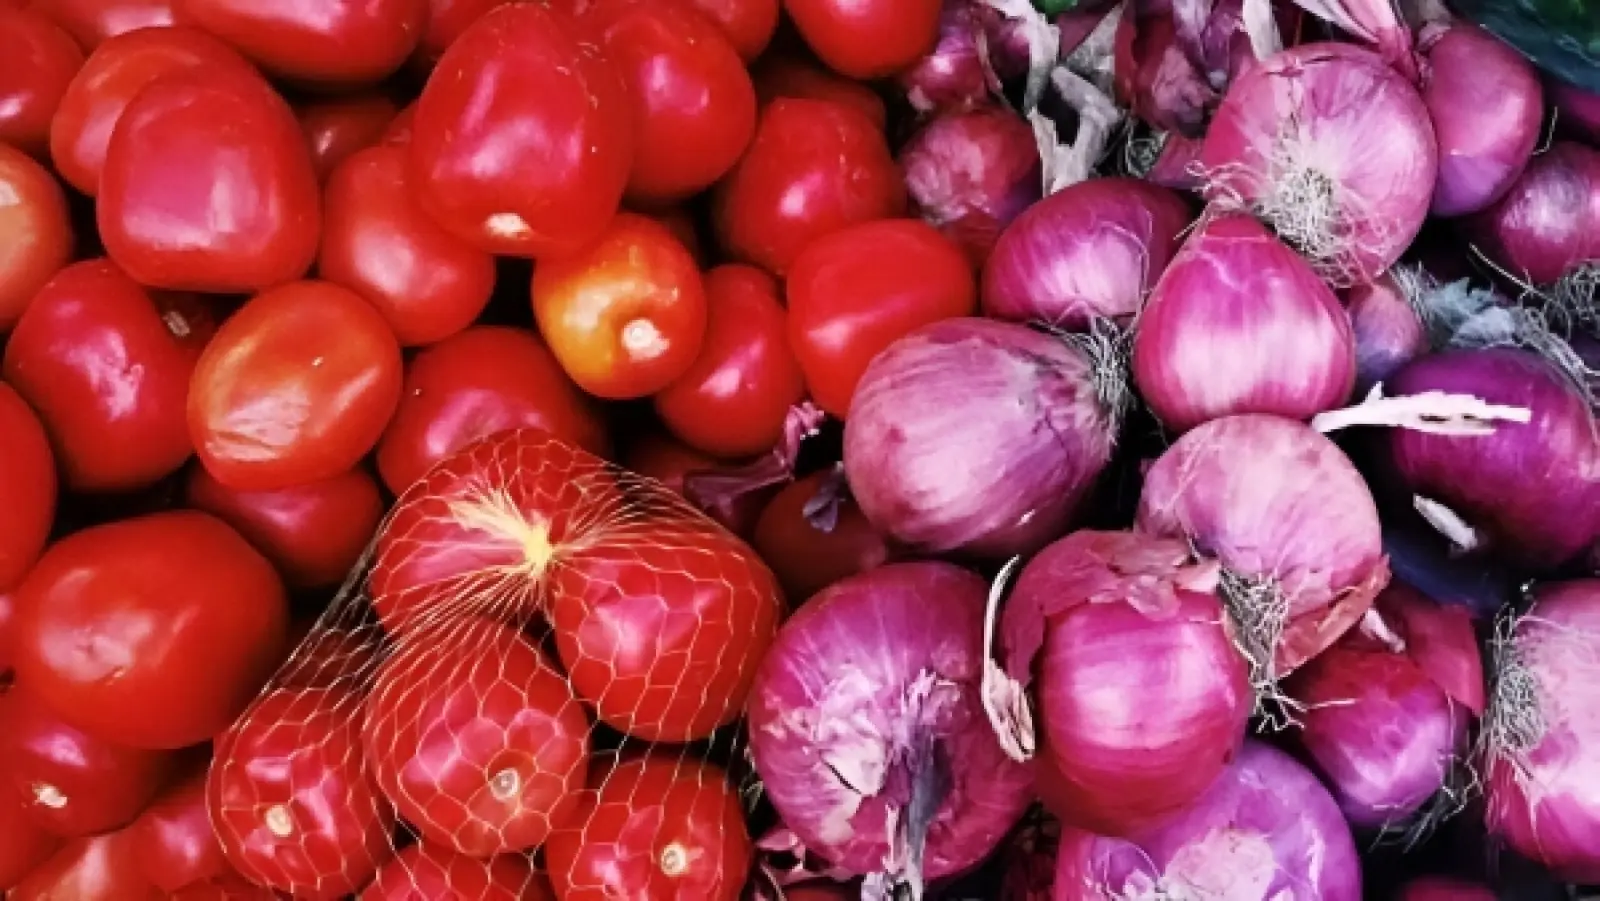 CRISIL Report: Prices of vegetables reduced, plates became cheaper by 5% due to reduction in prices of onion and tomato